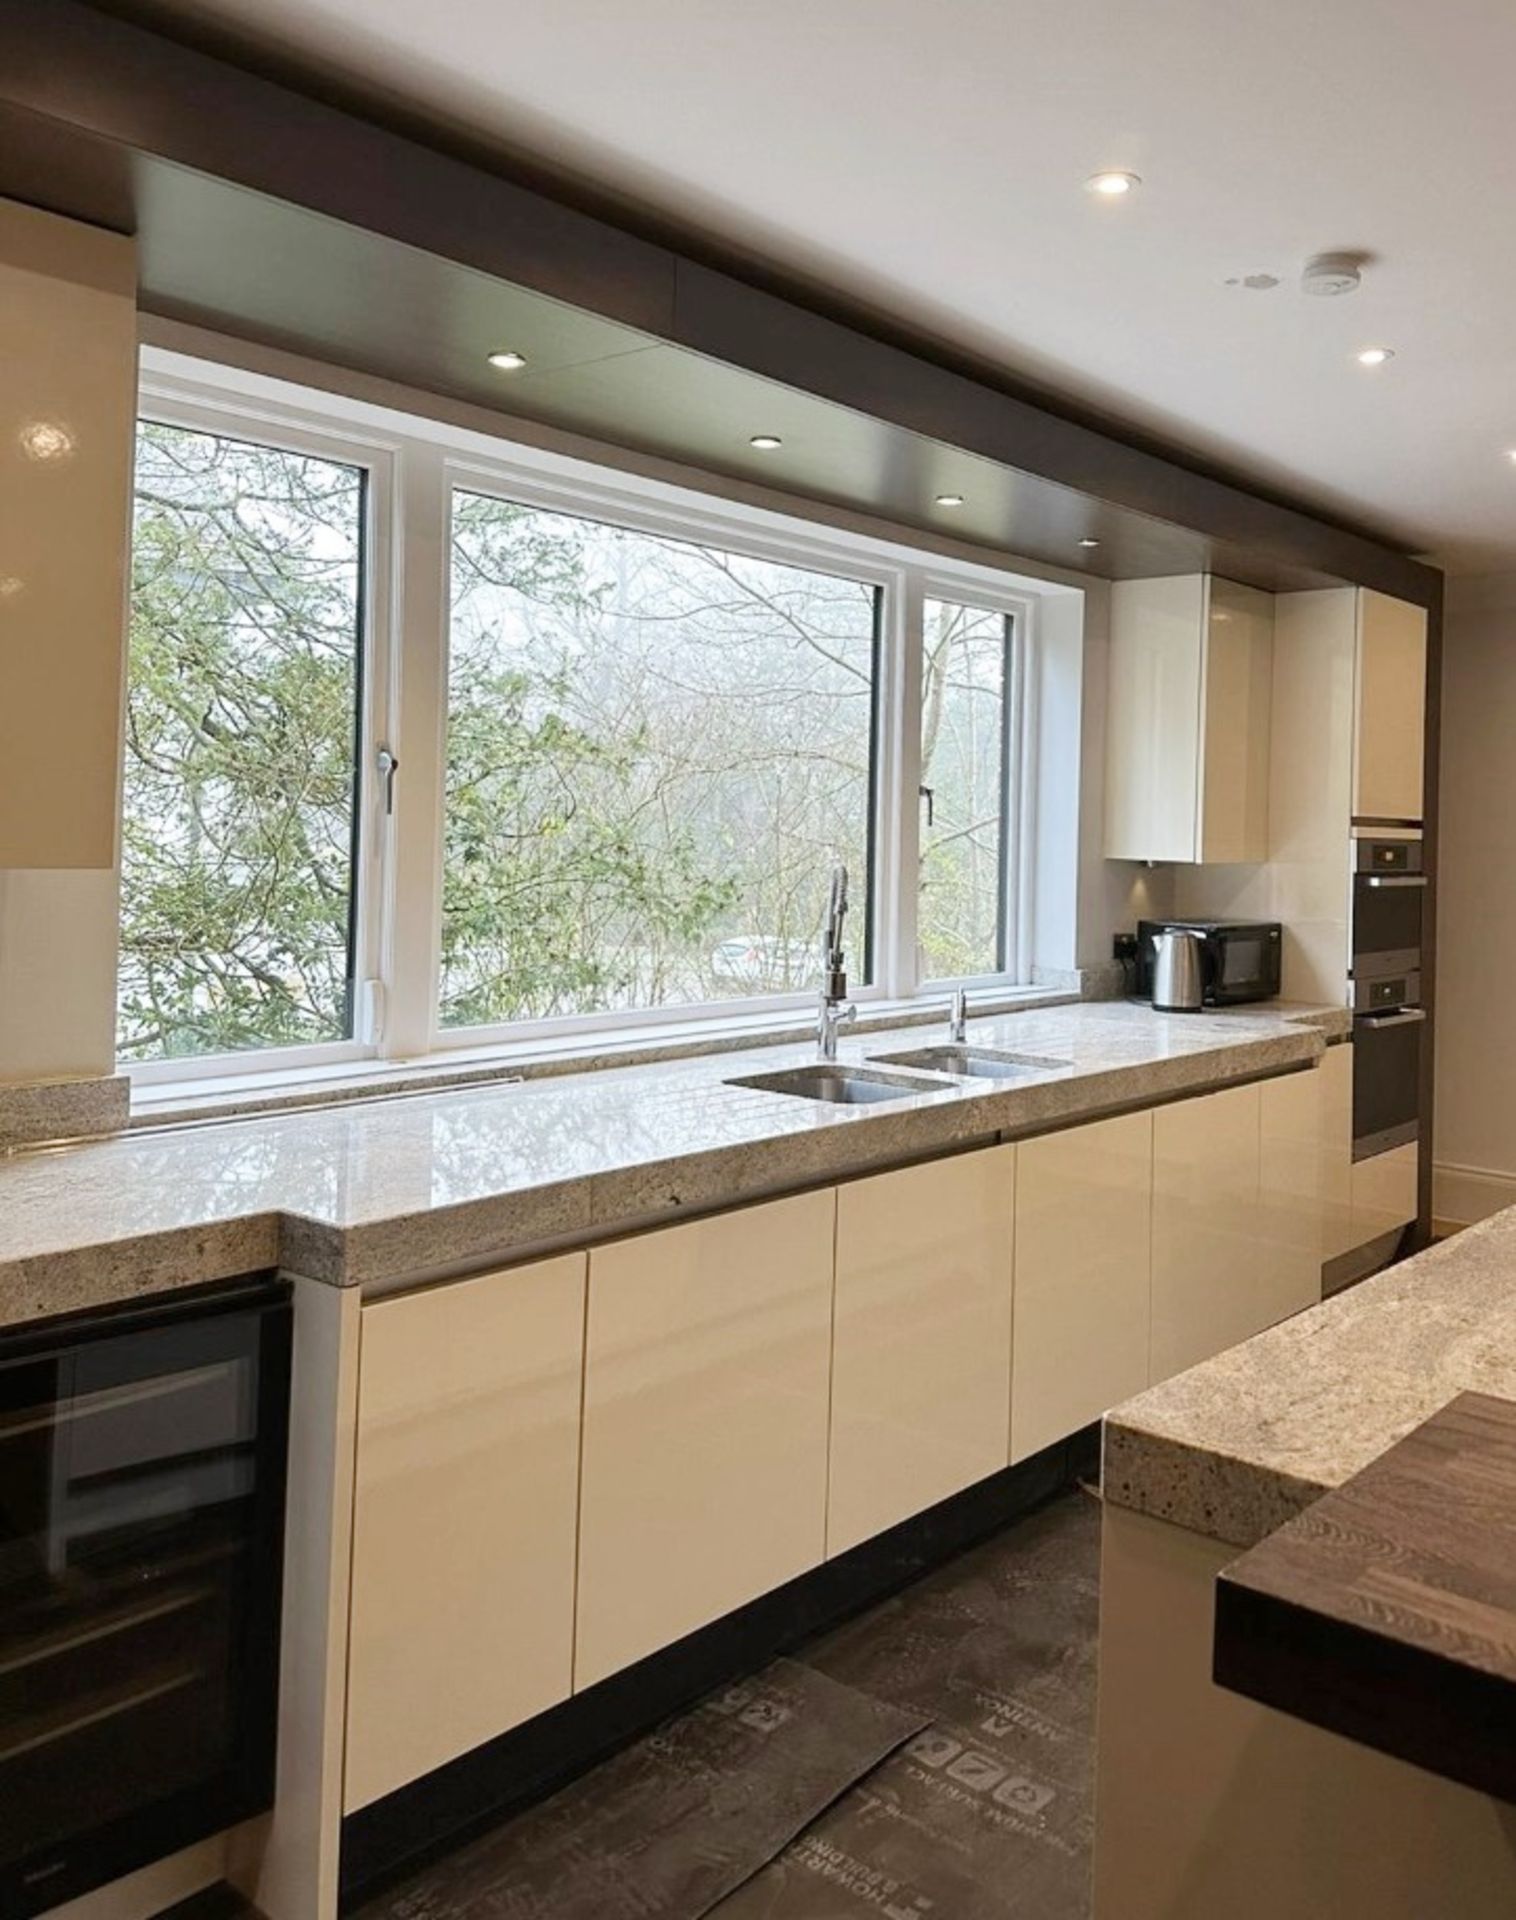 1 x Stunning SIEMATIC Luxury Fitted Handleless Kitchen In Cream, With Marble - Image 32 of 41